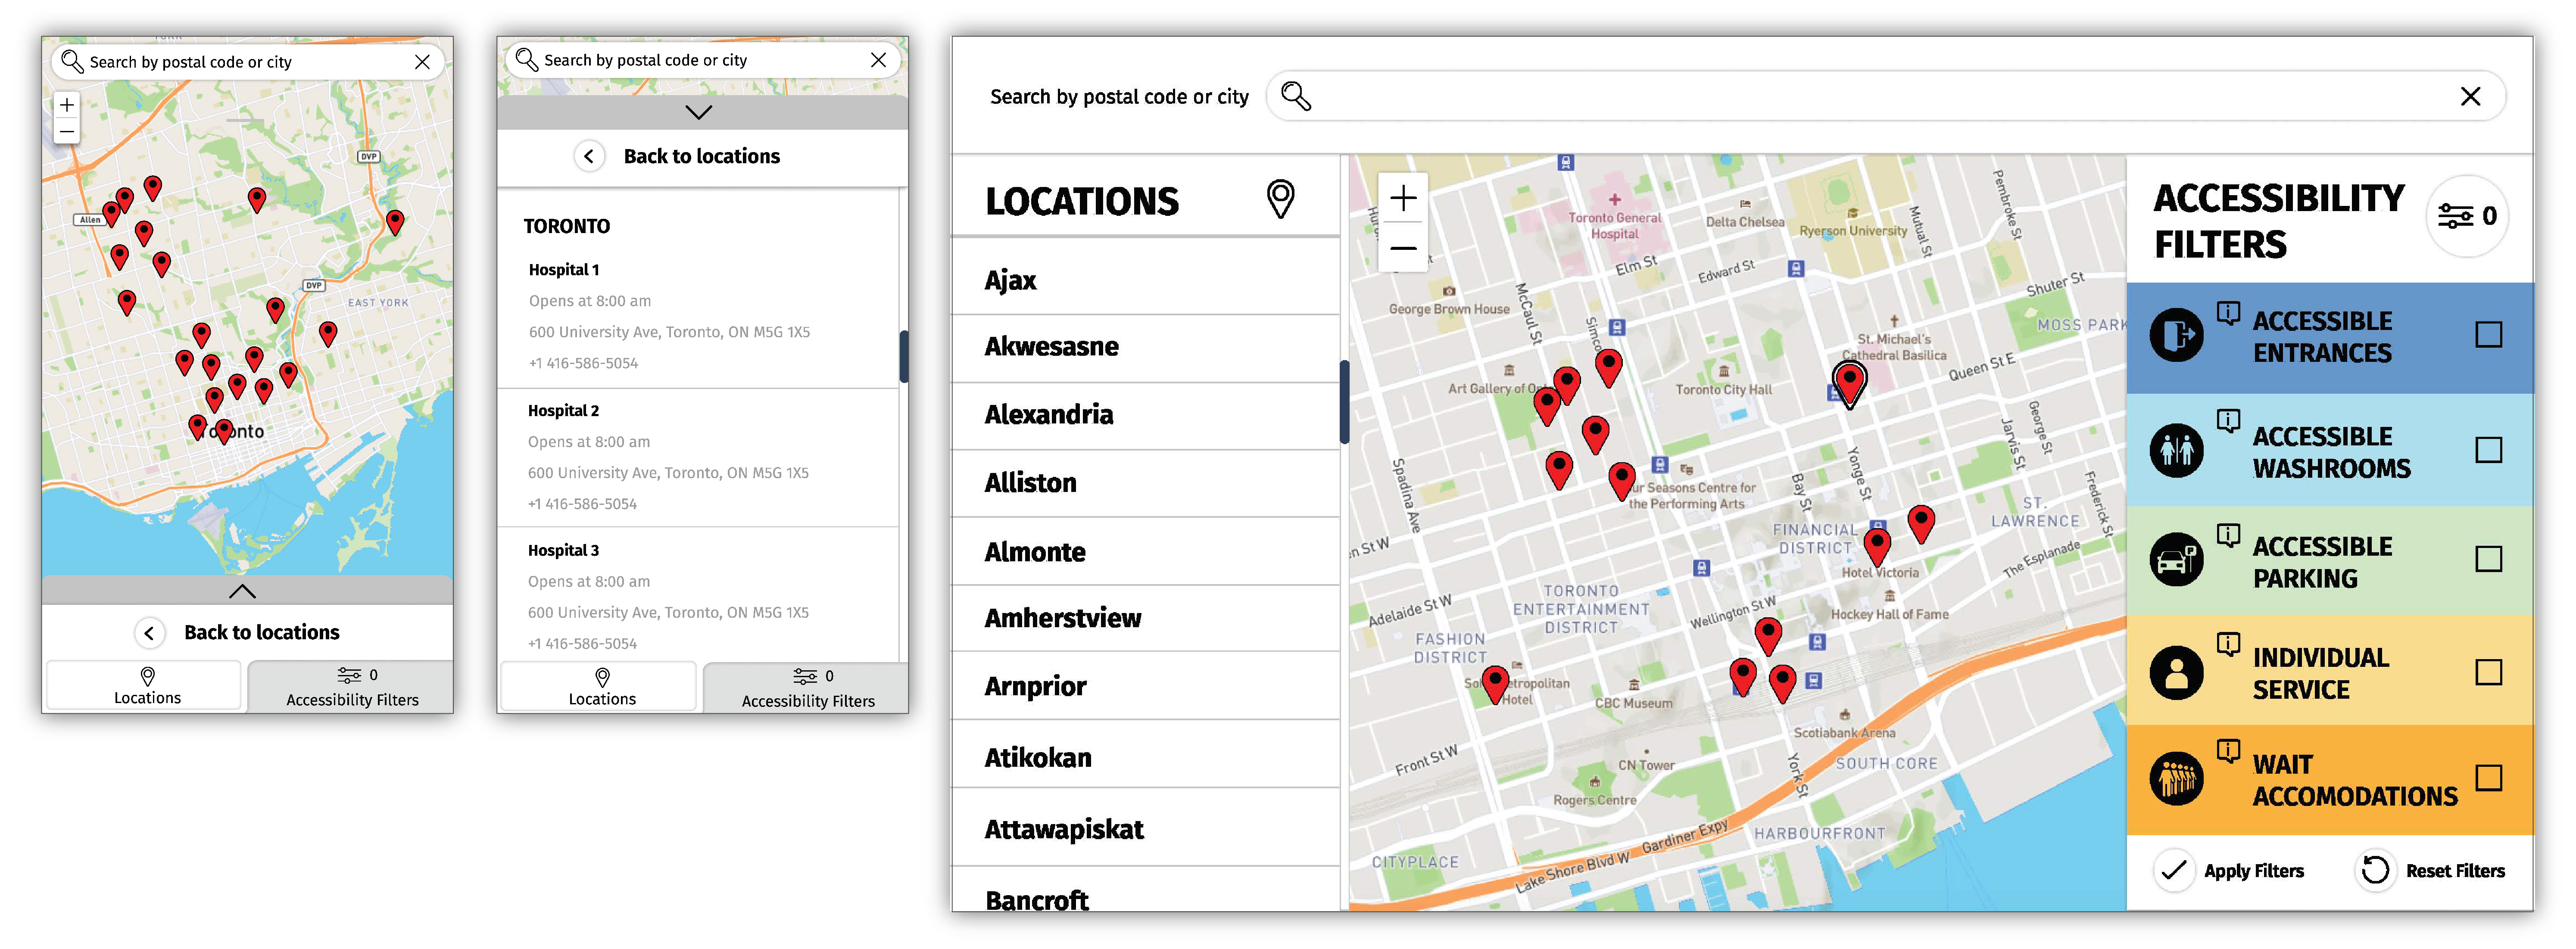 Wireframe showing the city/area navigation on mobile and desktop view. 